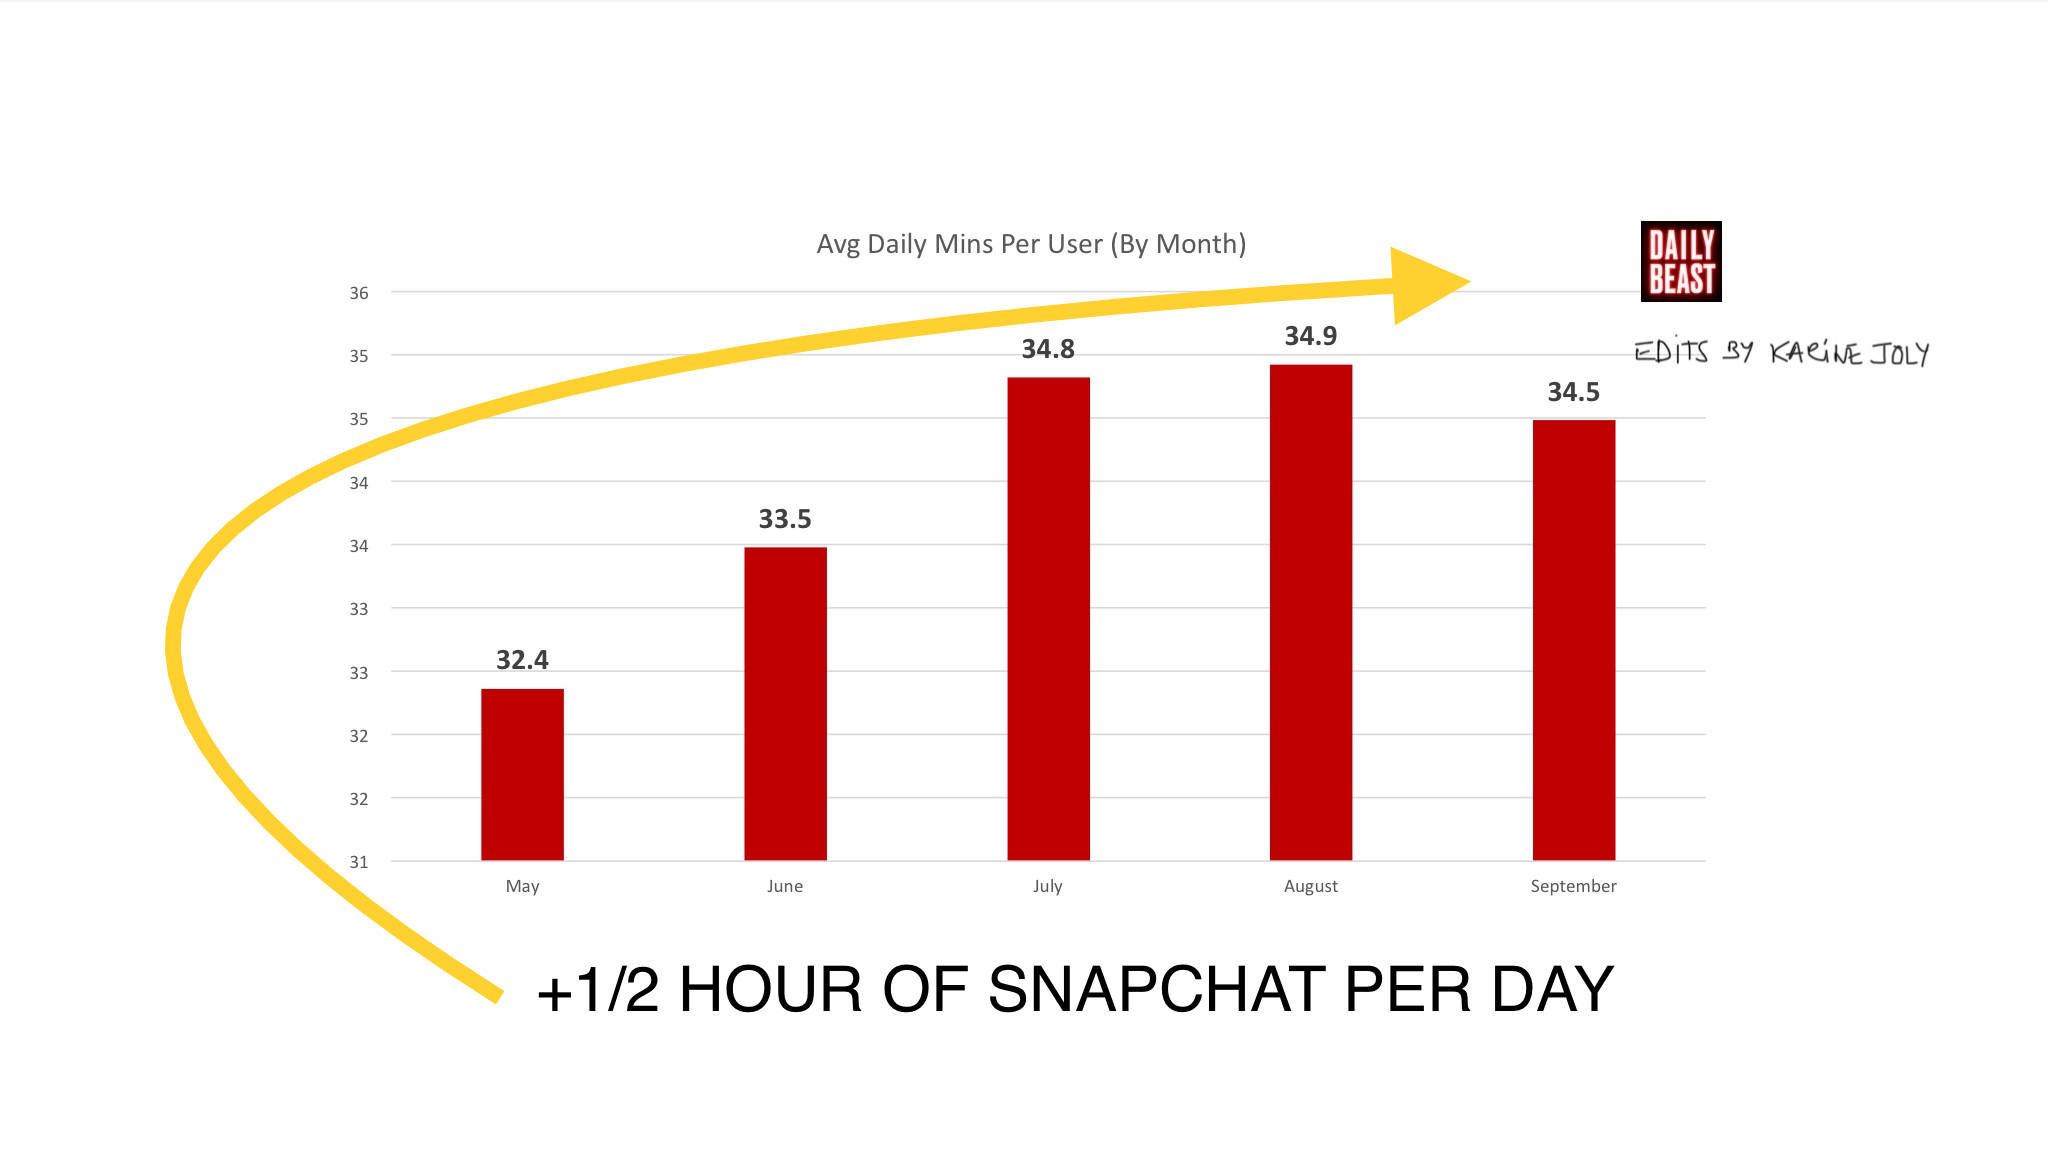 Top 5 Most Insightful Leaked Snapchat Data Charts For Higher Ed Marketers Higher Ed Experts